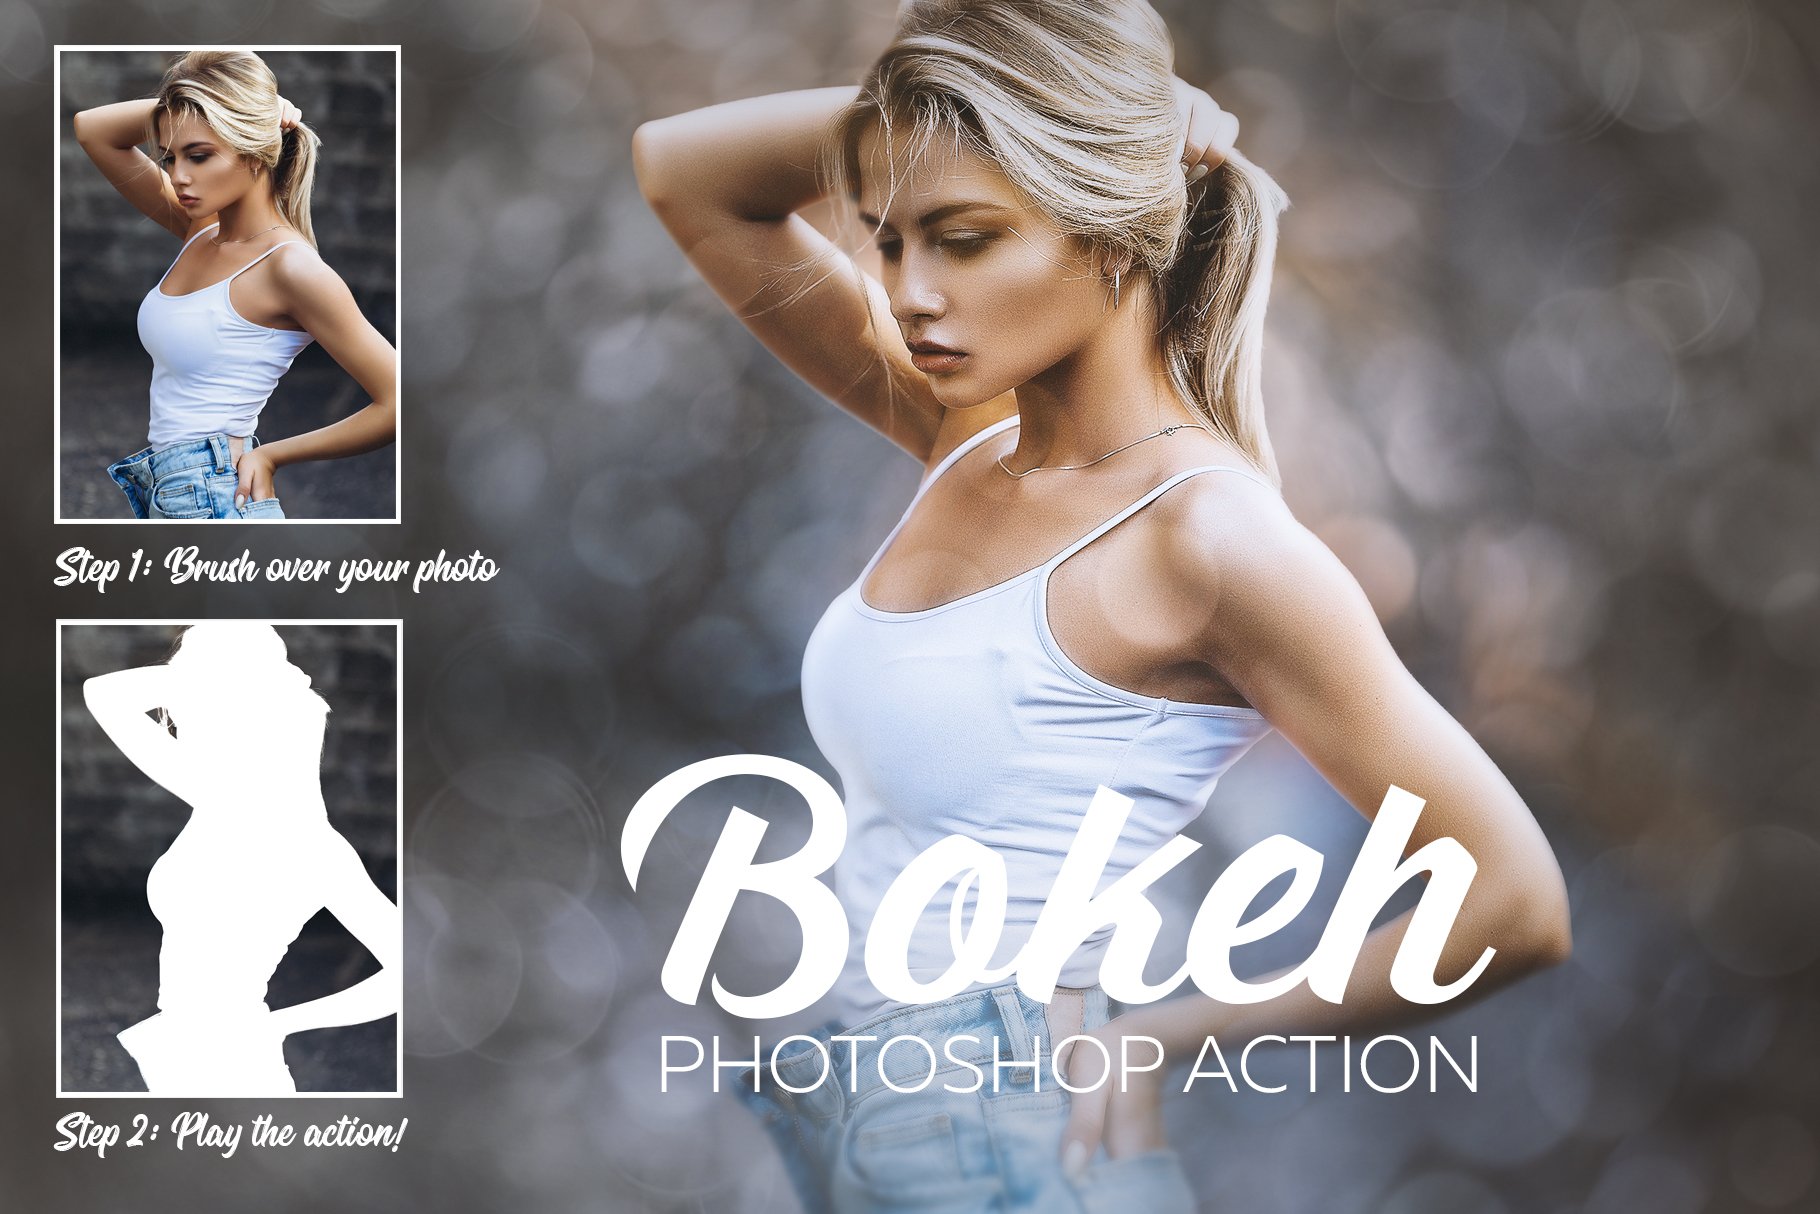 Bokeh Photoshop Actioncover image.